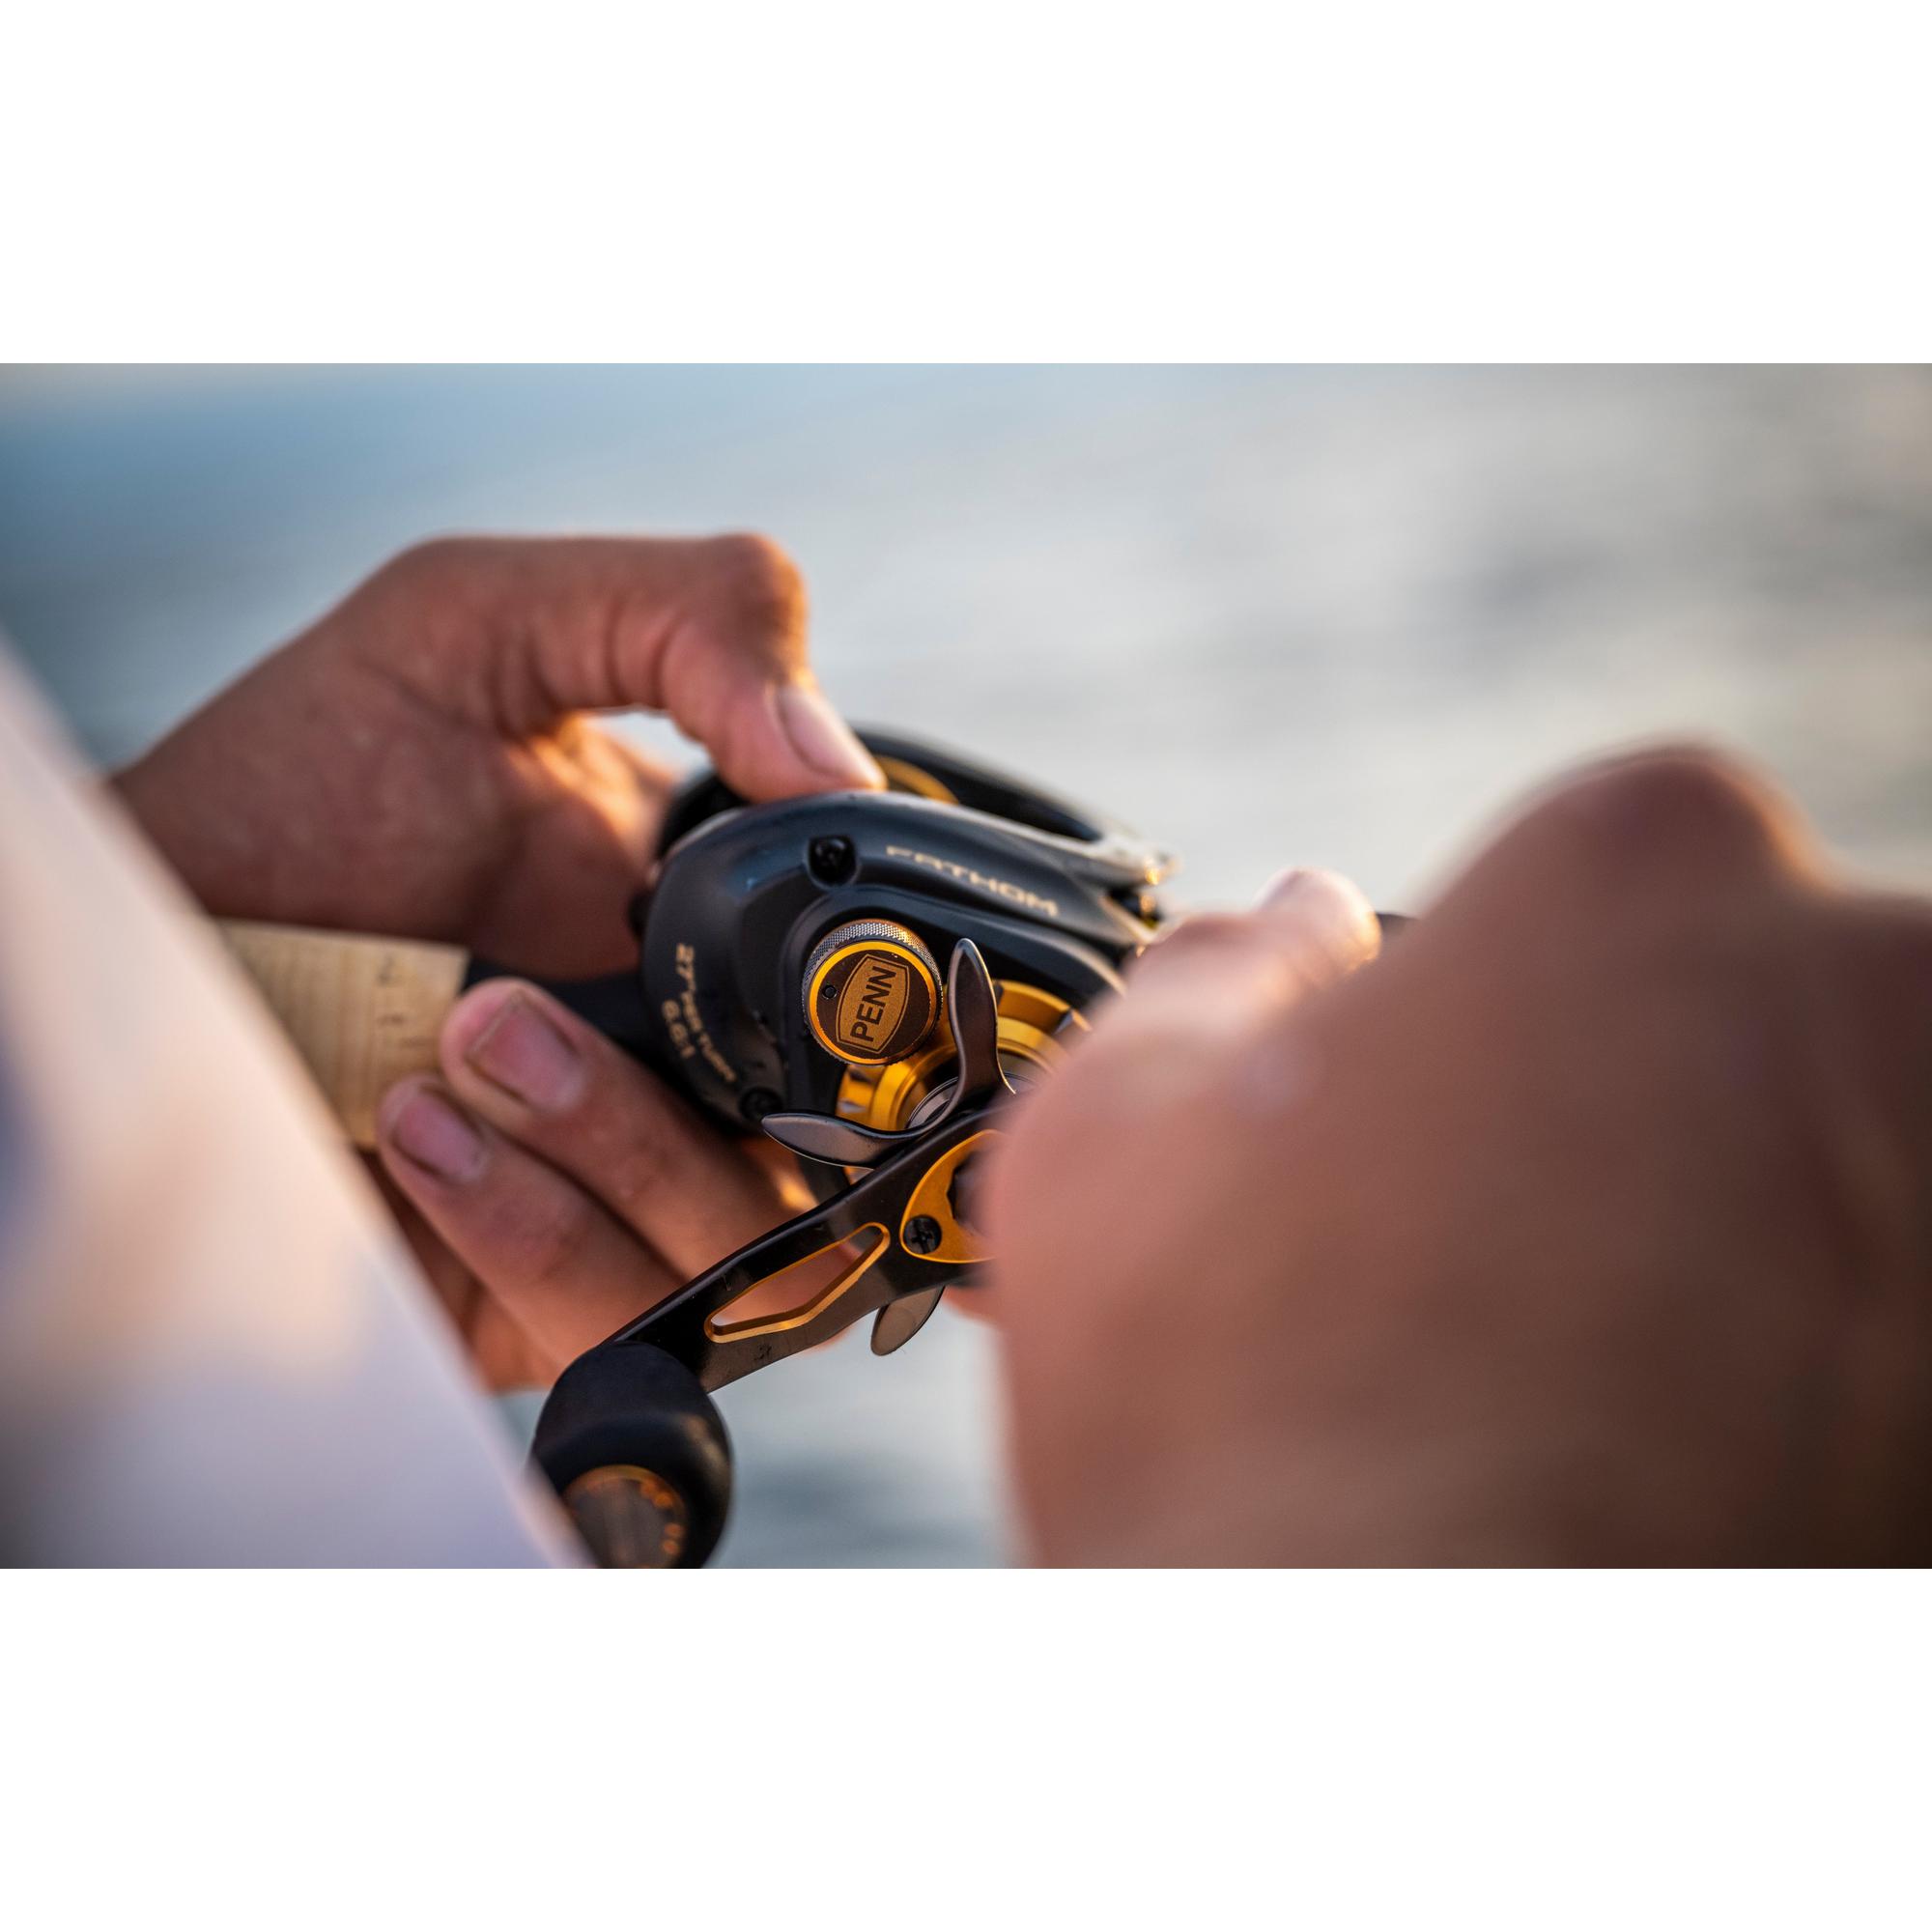 Penn Fathom 300 Low Profile Reel - Buy from NZ owned businesses